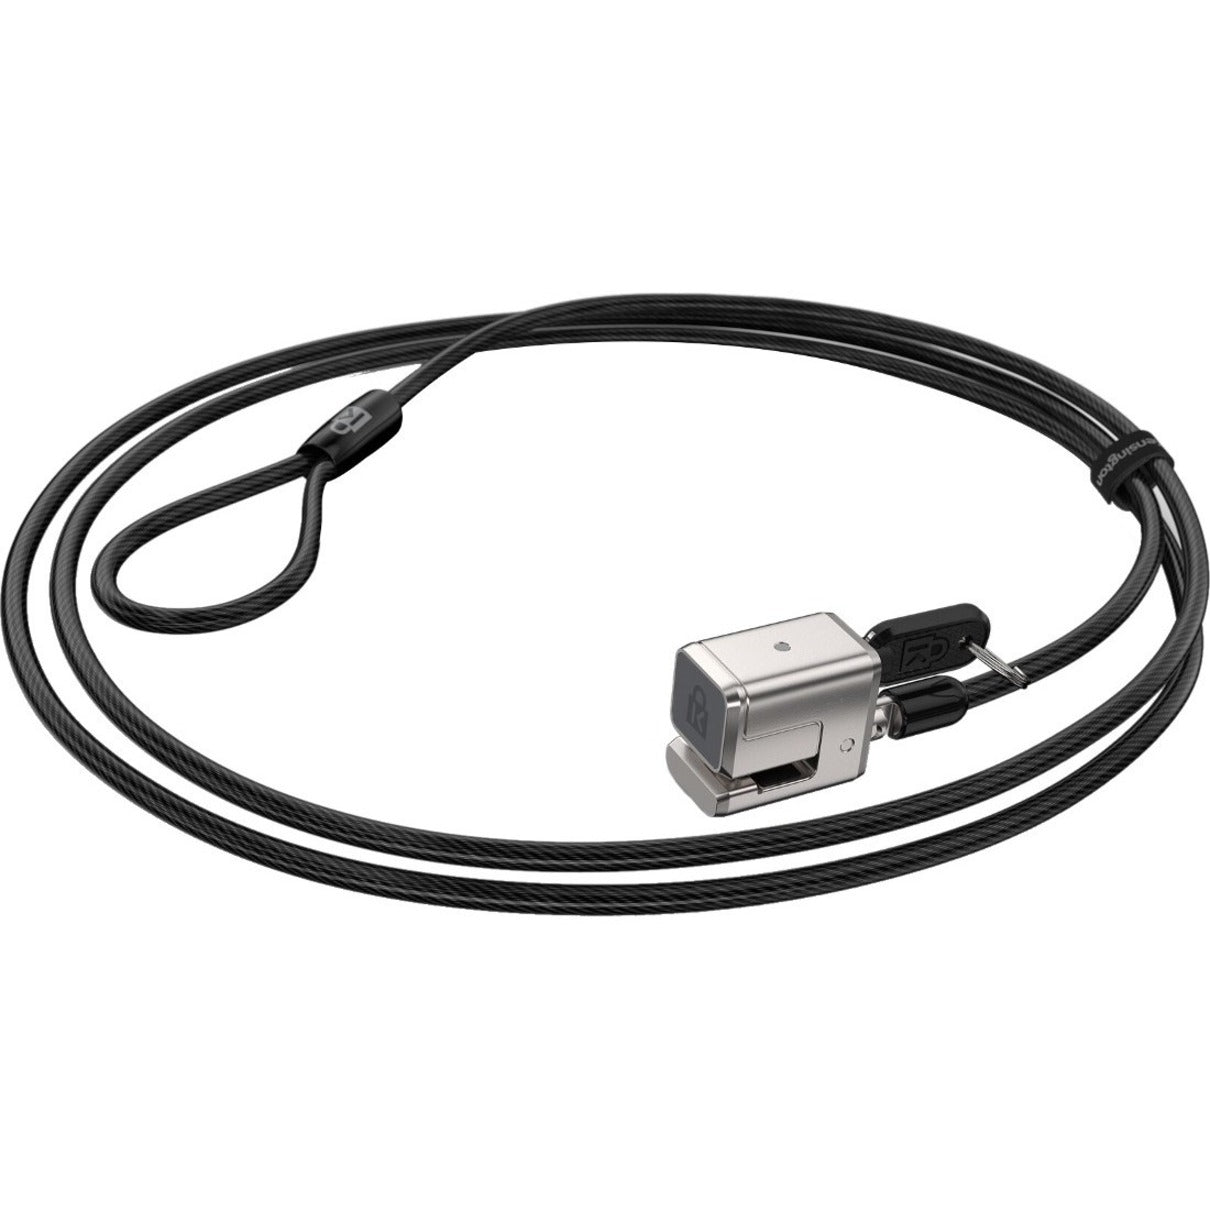 Kensington K68136WW Keyed Cable Lock Surface Pro, On-Demand, 5.91 ft Cable Length, 5 Year Warranty